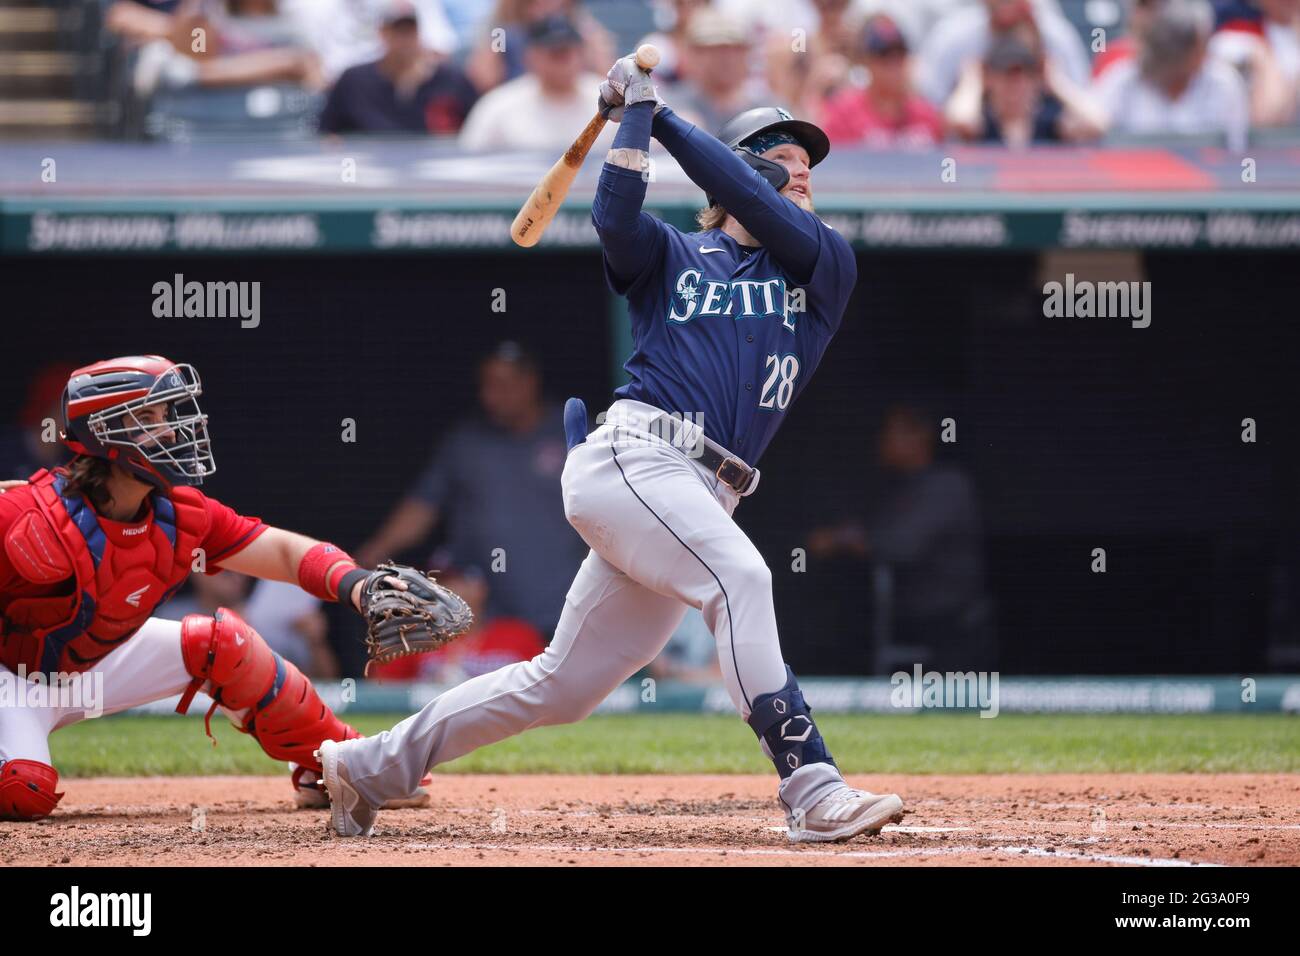 CLEVELAND, OH - JUNE 13: Jake Fraley (28) of the Seattle Mariners hits a two-run home run in the fourth inning of a game against the Cleveland Indians Stock Photo